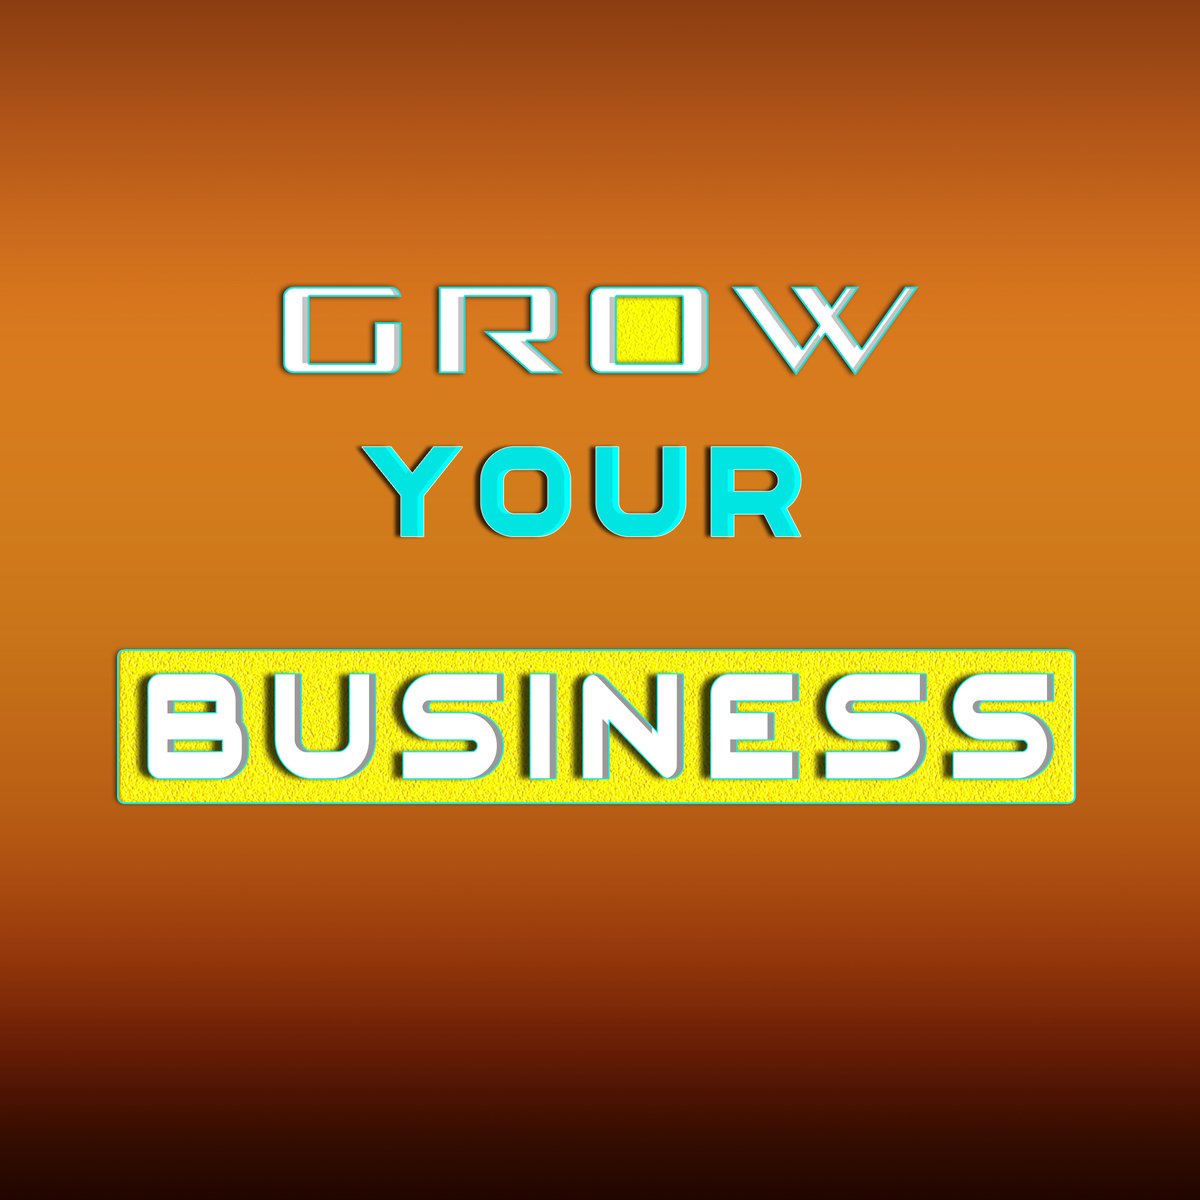 How to Grow your Business?

#md_jobayer_hossen #Md_Jobayer #jobayer_hossen #jobayer #jobayer_hossen #jobayer_hossen #md_jobayer_hossen #businessgrowth #smallbiz #entrepreneur #startup #GrowYourBusiness #BusinessExpansion #scaleup #businesssuccess #SMB #businessstrategy #SEO